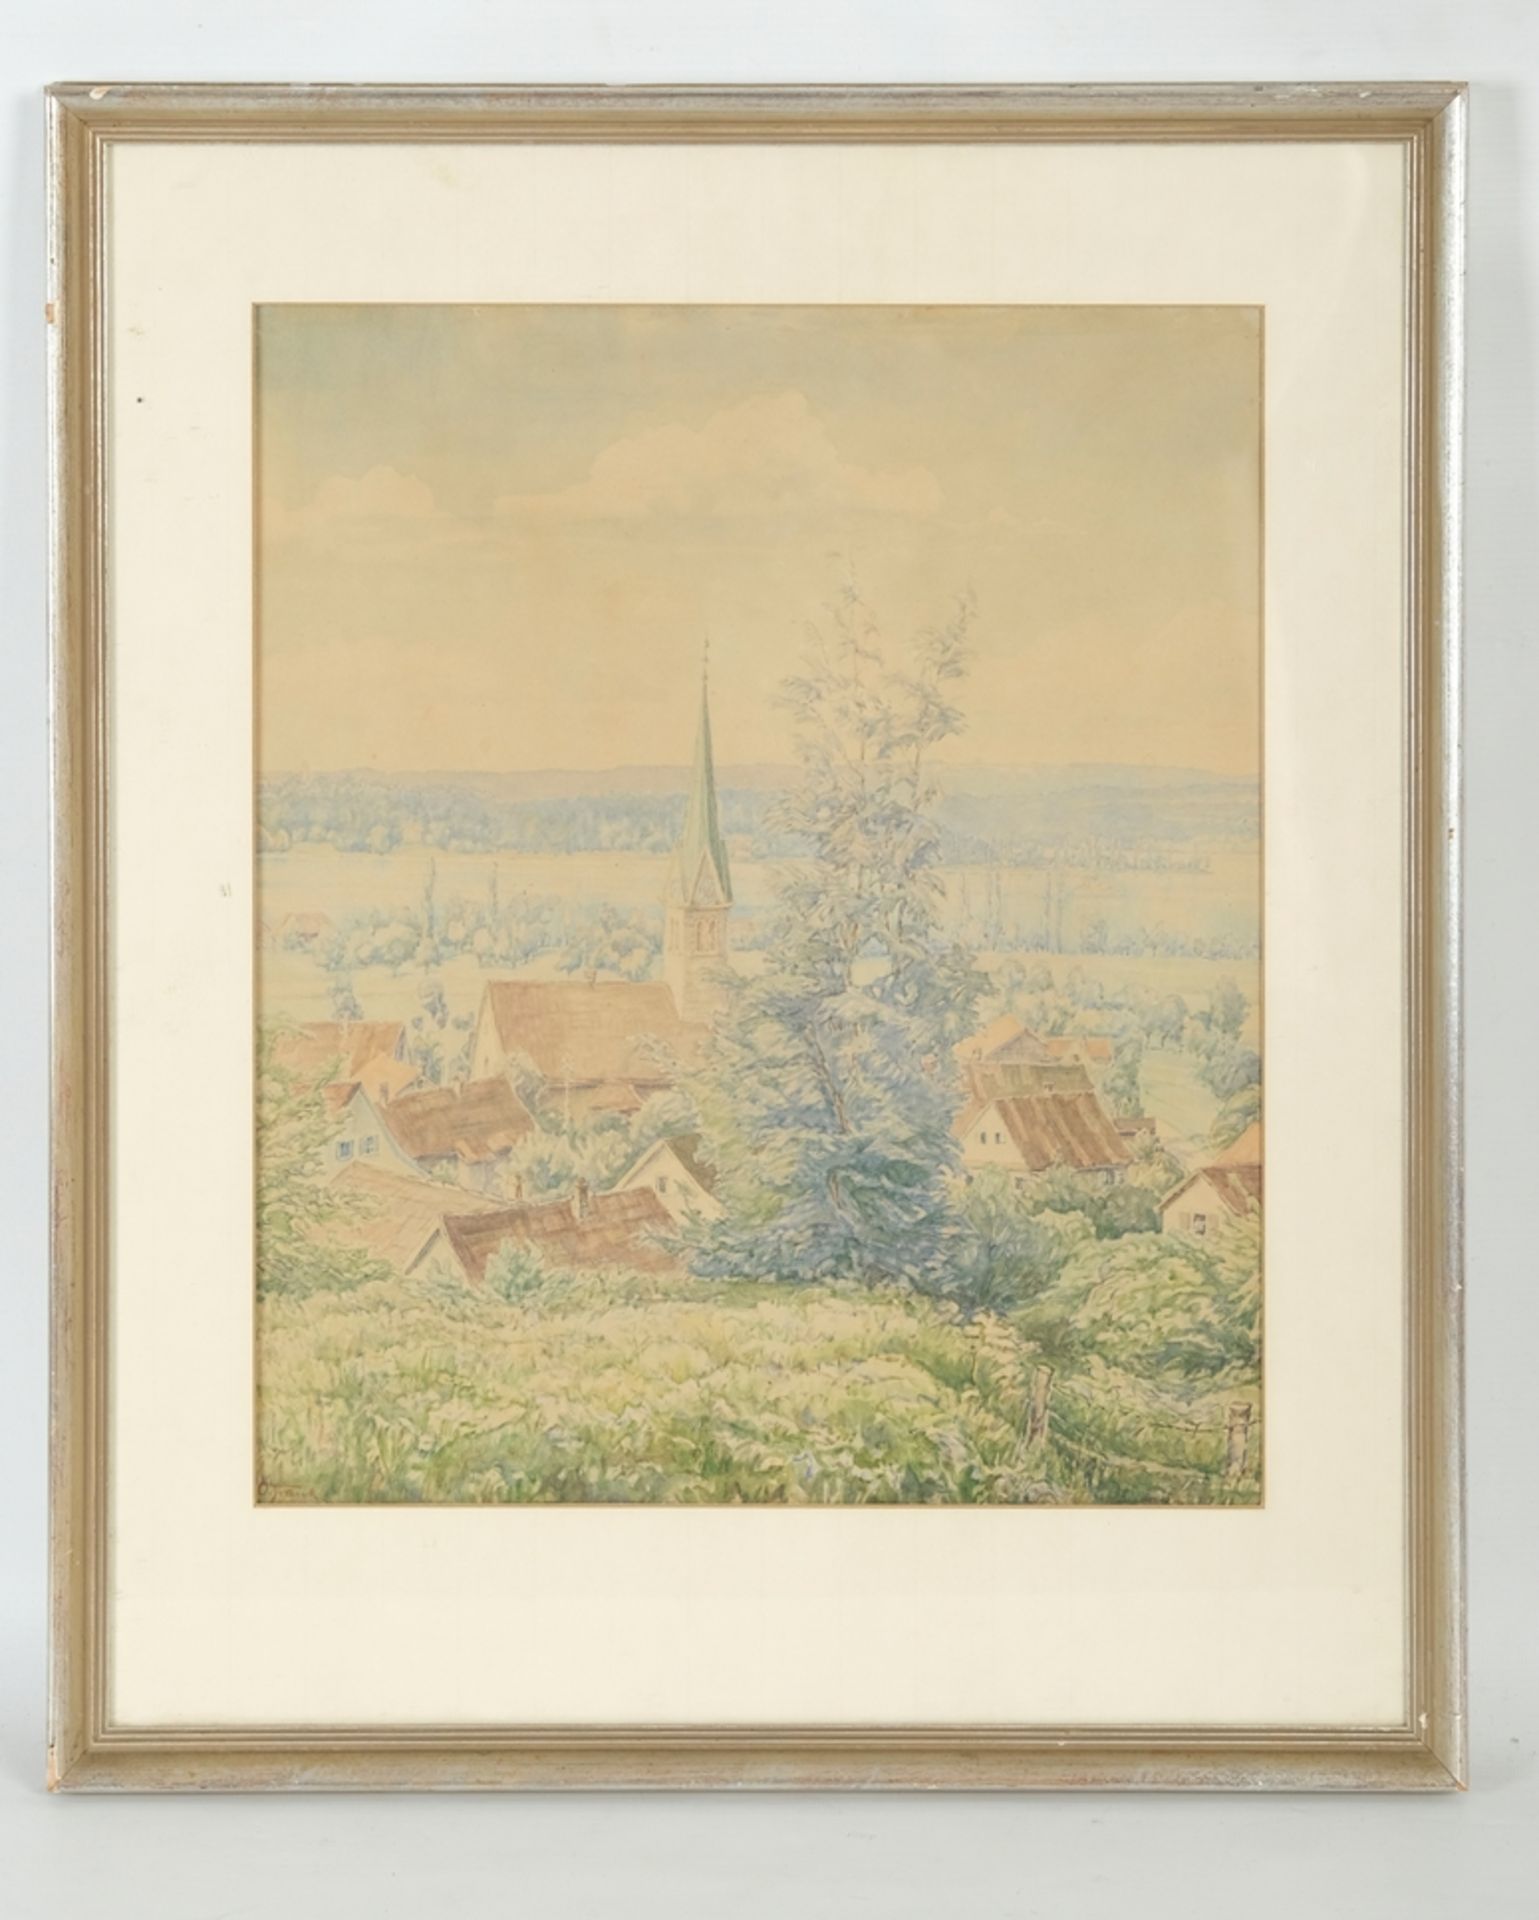 Frank, O. (20th century)(20th century) View from Unteruhldingen over the lake, no year, watercolour - Image 2 of 3